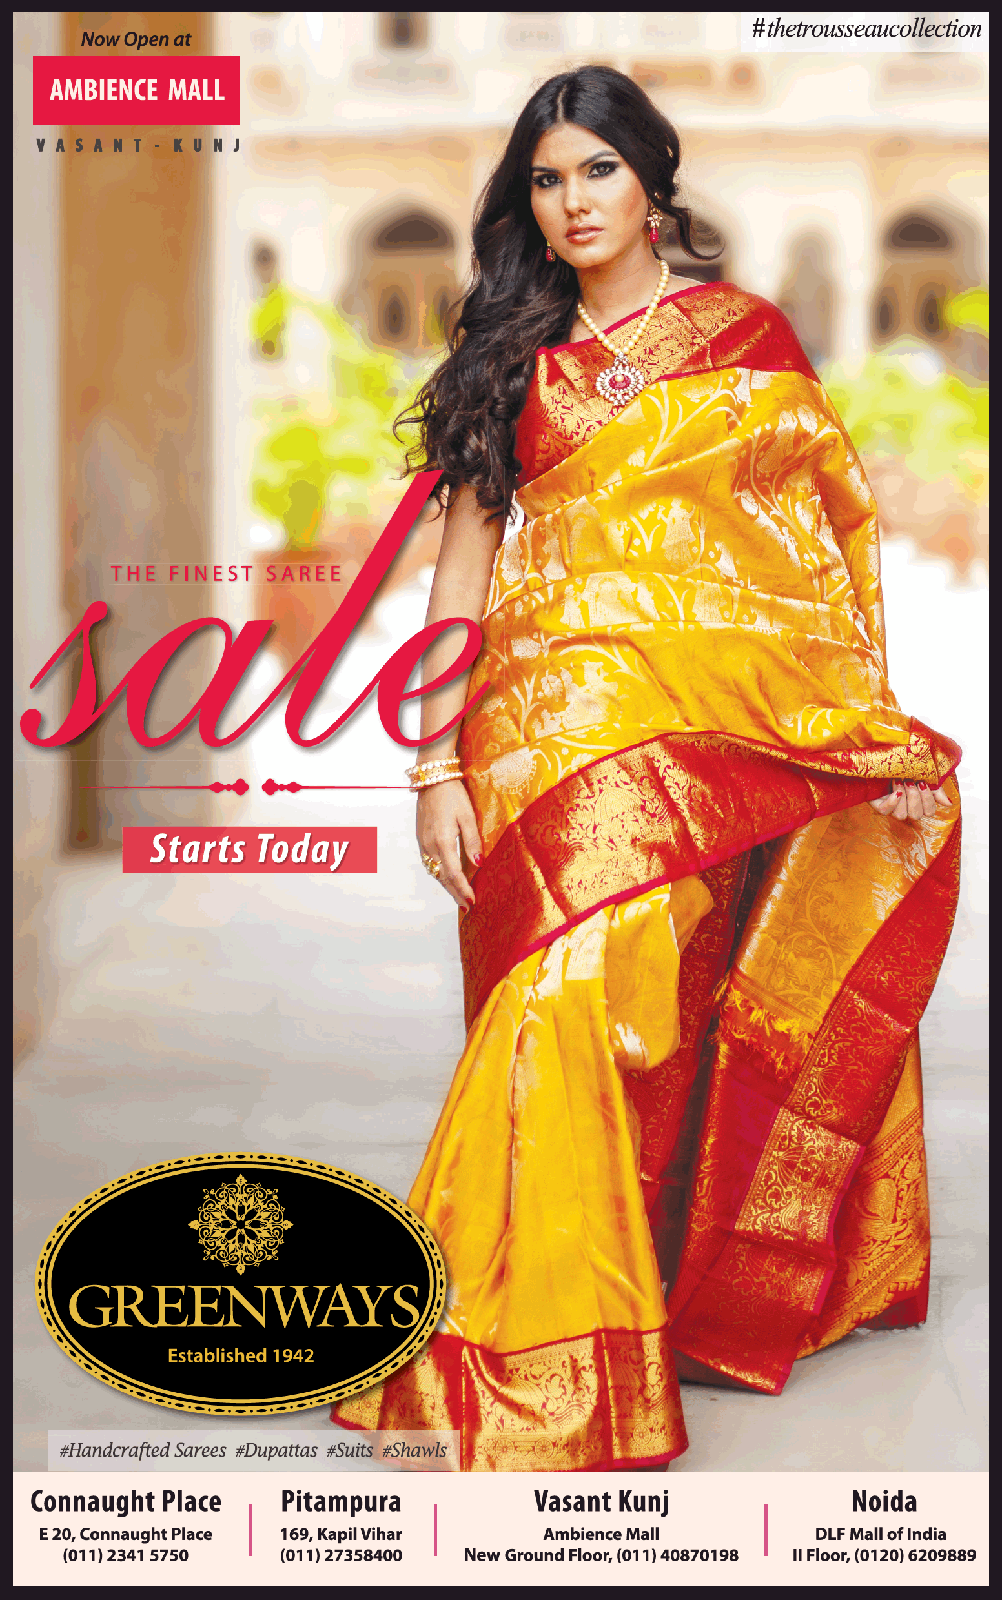 greenways-the-finest-saree-sale-starts-today-ad-delhi-times-05-01-2019.png